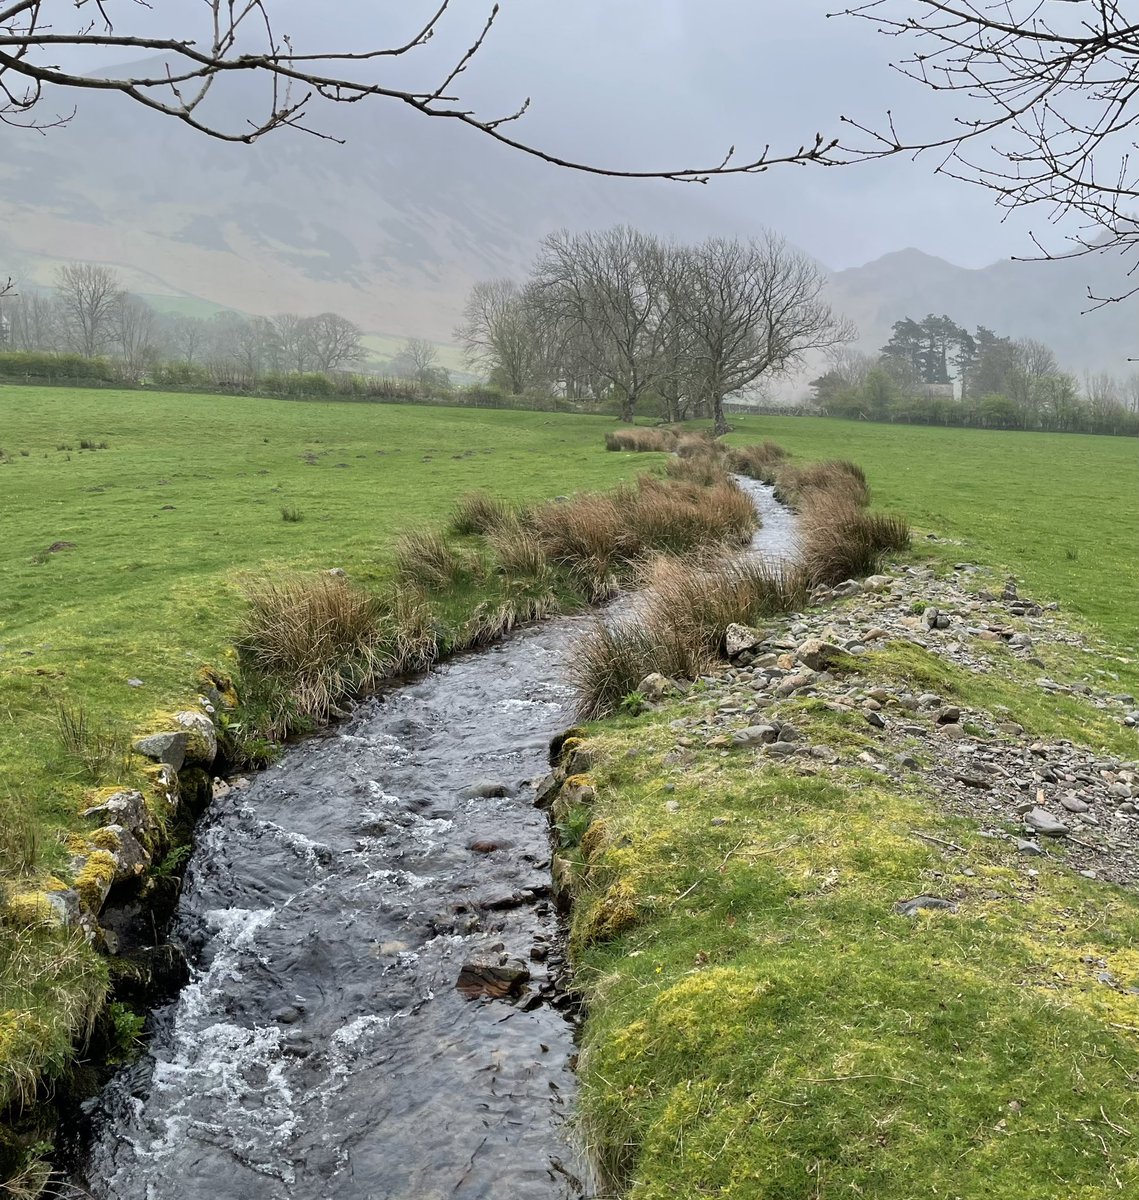 Getting my lungs full of fresh air yesterday in a circular walk round Ennerdale Water. Part of my training towards my big hike of 96 miles and a jolly up Ben Nevis in June raising funds for @EVHandJigsaw 

justgiving.com/page/lynne-mal…